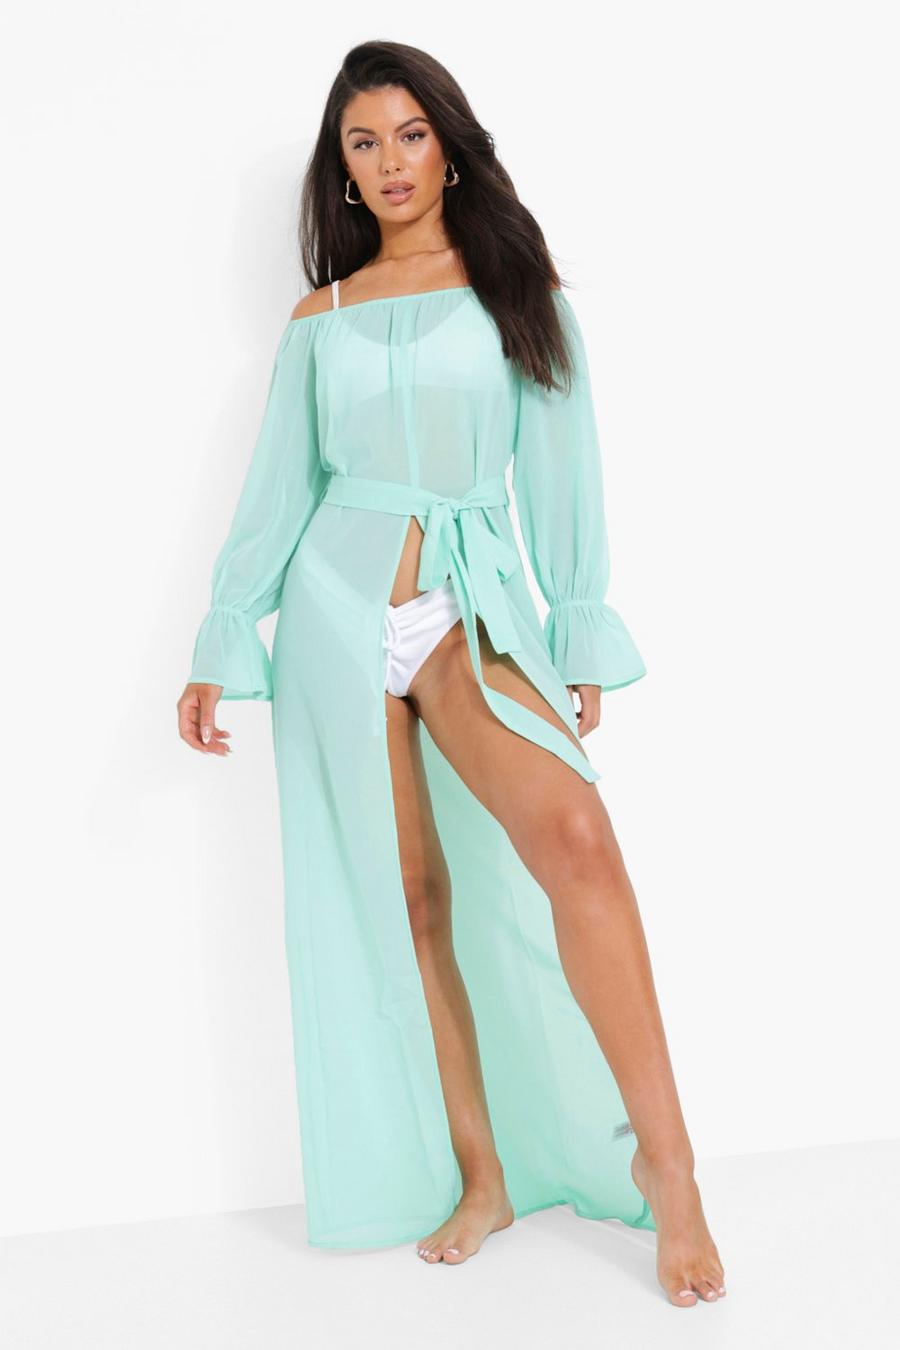 Mint Chiffon Off The Shoulder Beach Dress image number 1